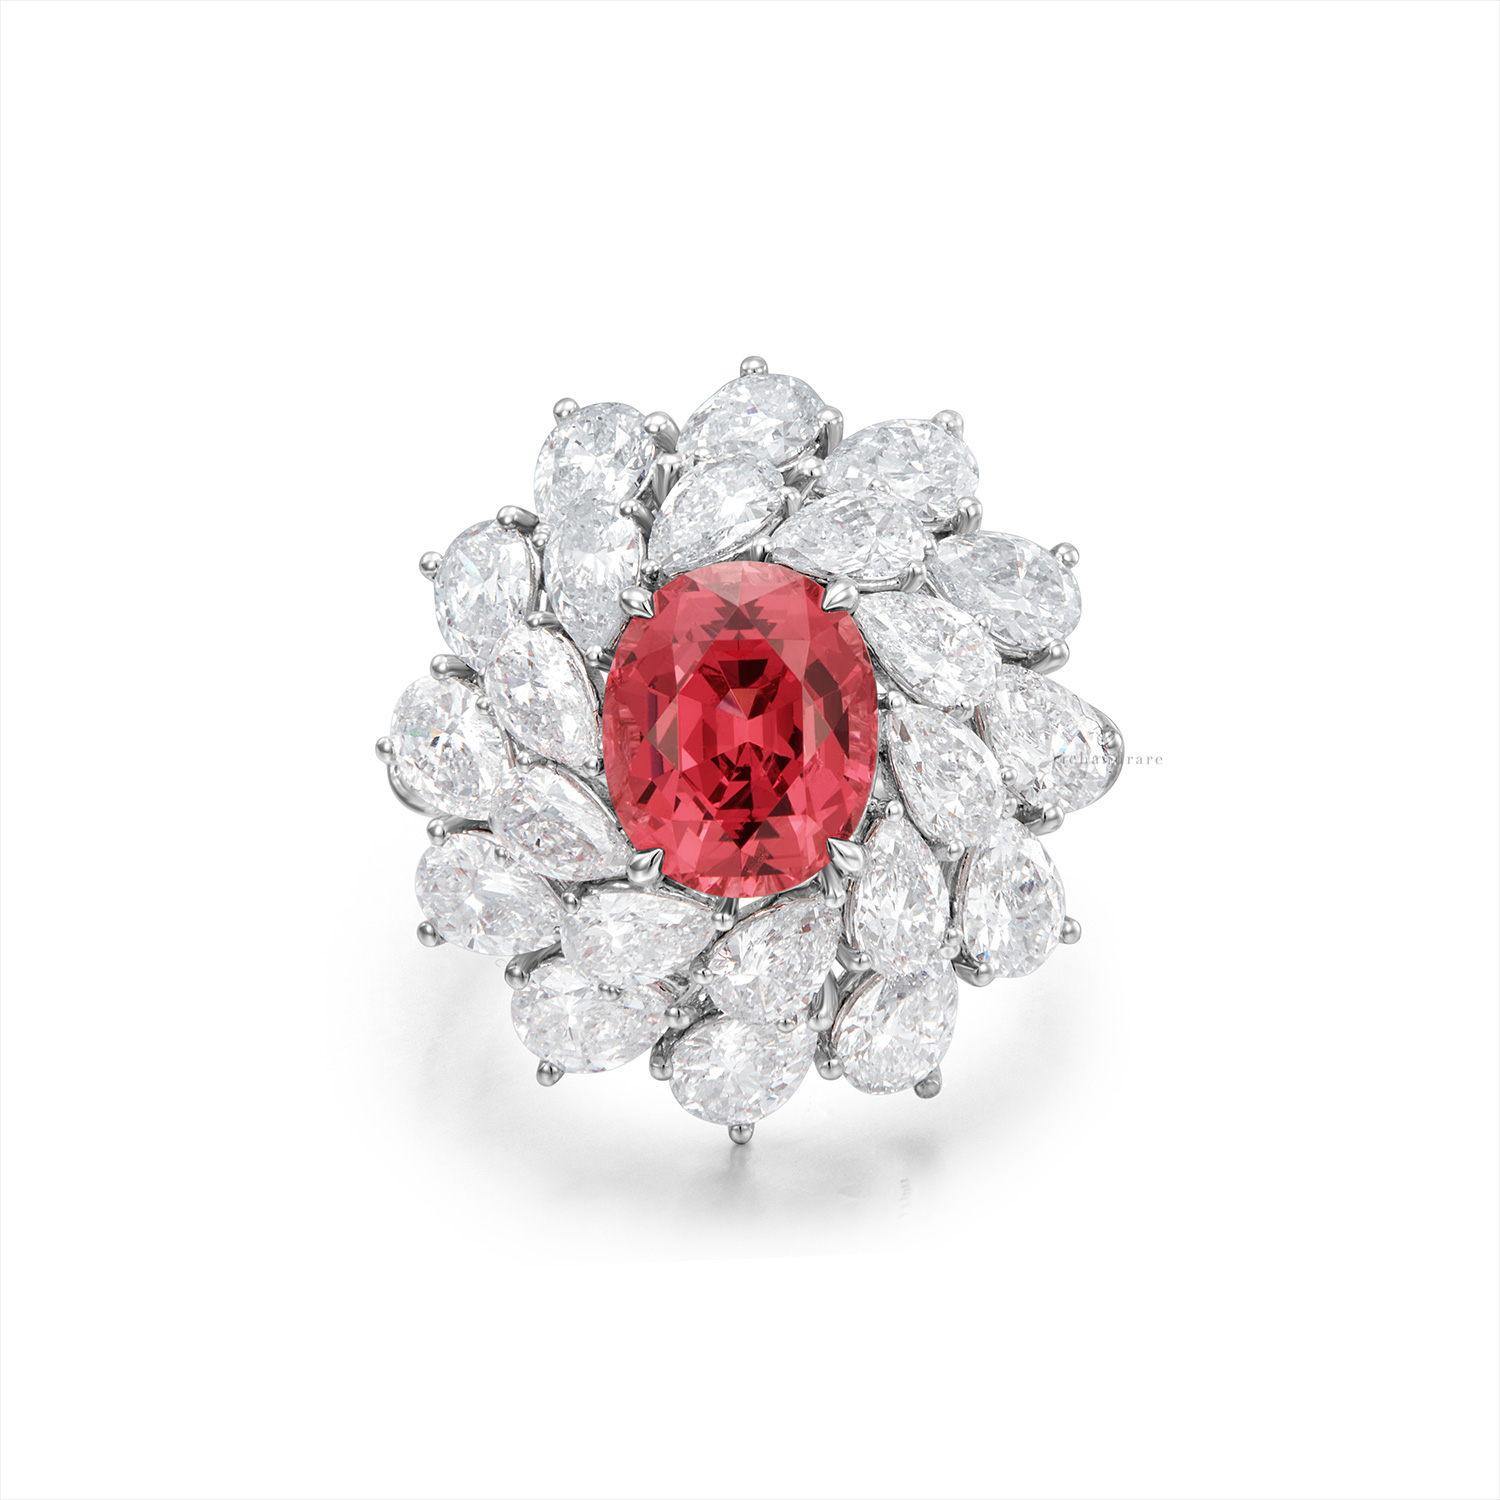 RED SPINEL AND DIAMOND RING